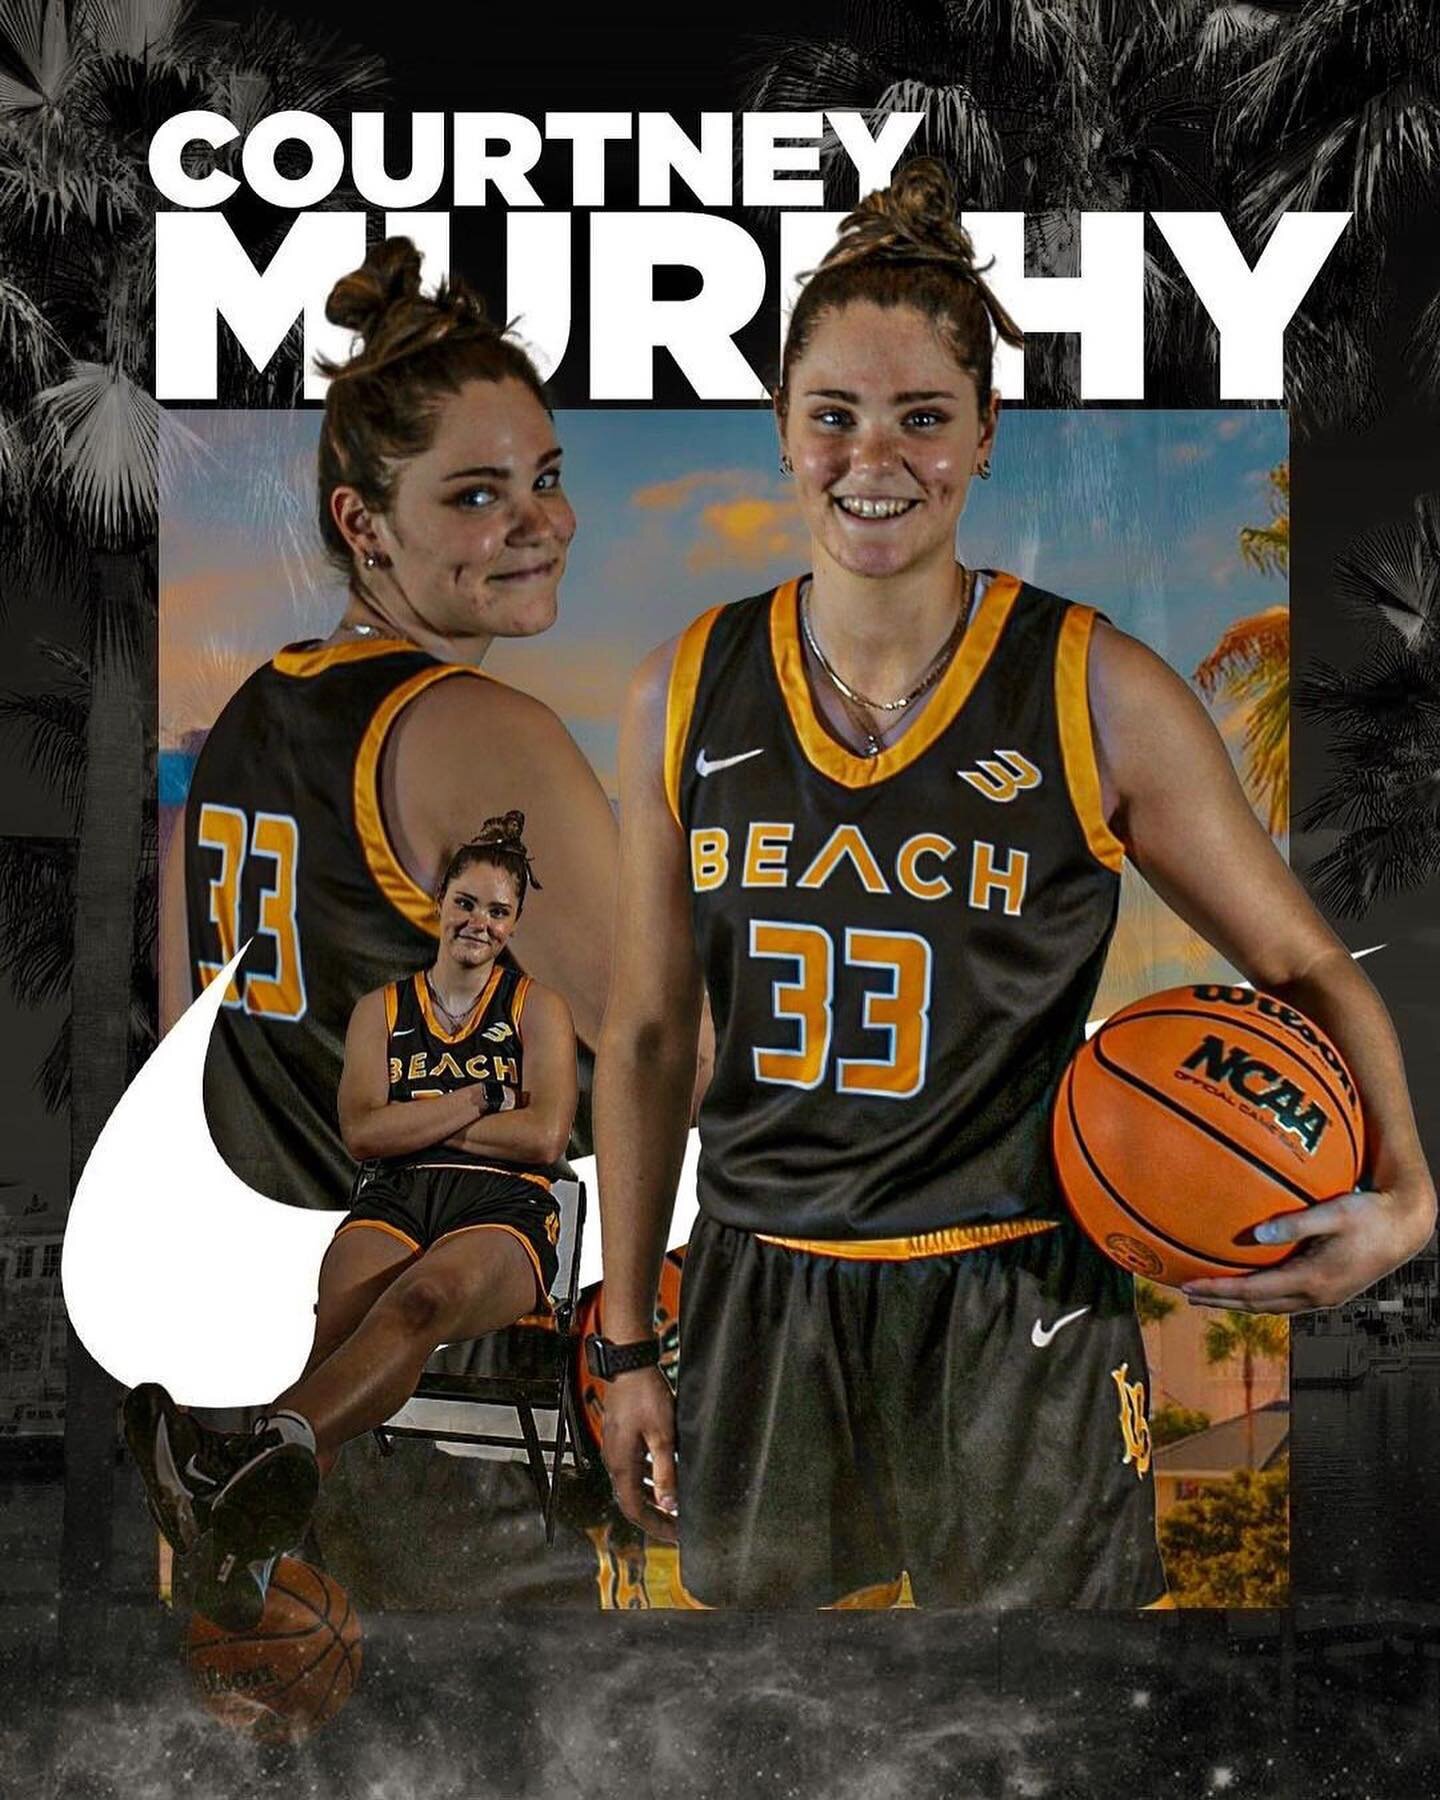 After graduating and finishing off a solidified career at @seattleu_wbb, (2nd all-time 3-point leader) ☔️
@cocohopz is heading to Long Beach State University. Courtney is about to bring some of that Seattle rain to the Beach 😮&zwj;💨 Beyond proud of